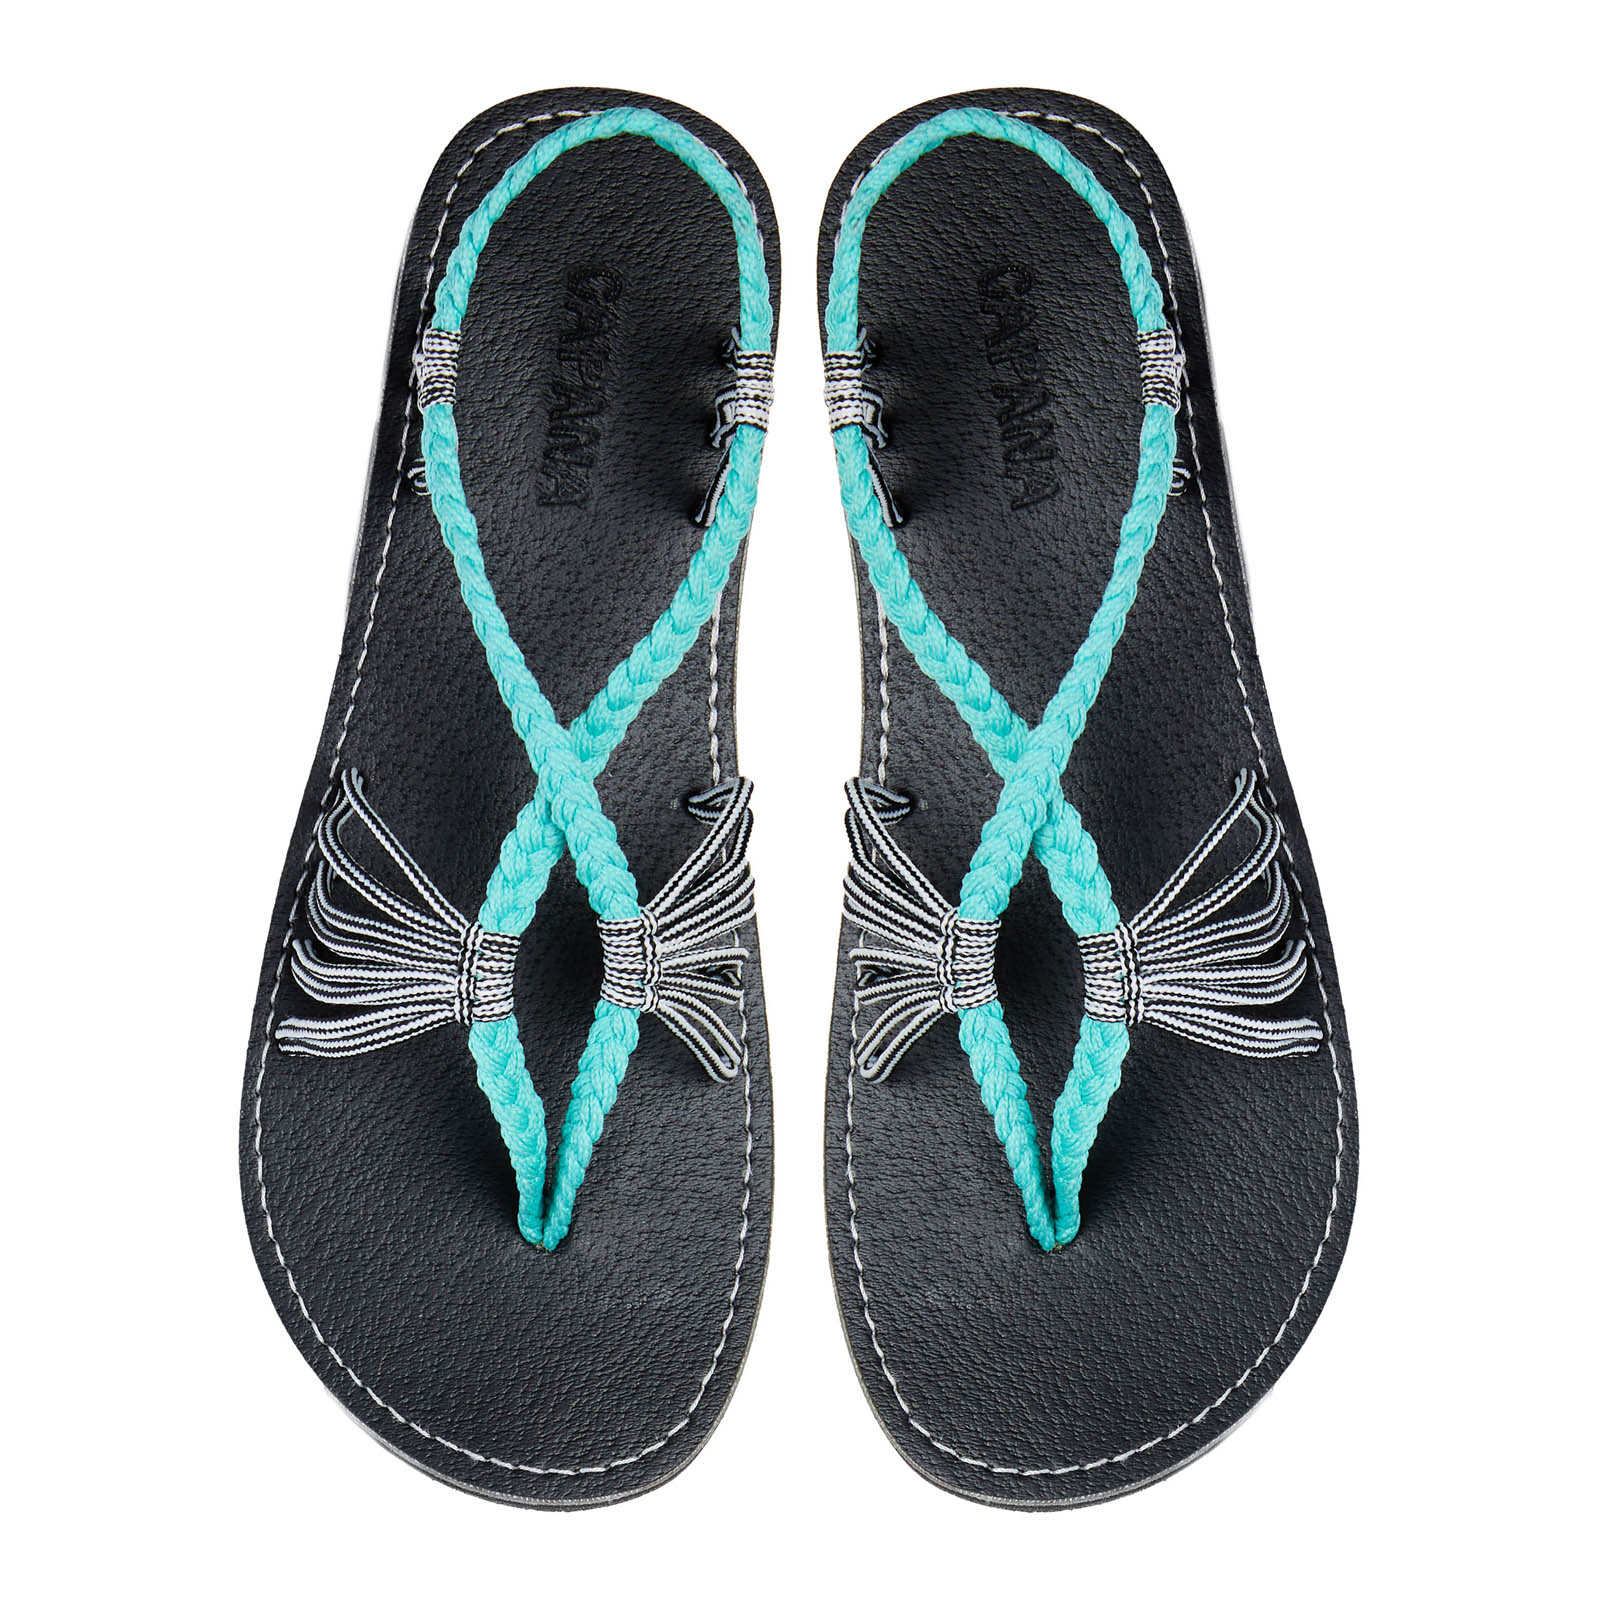 Cocoon Turquoise Zebra Rope Sandals Teal Black White thong design Flat sandals for women